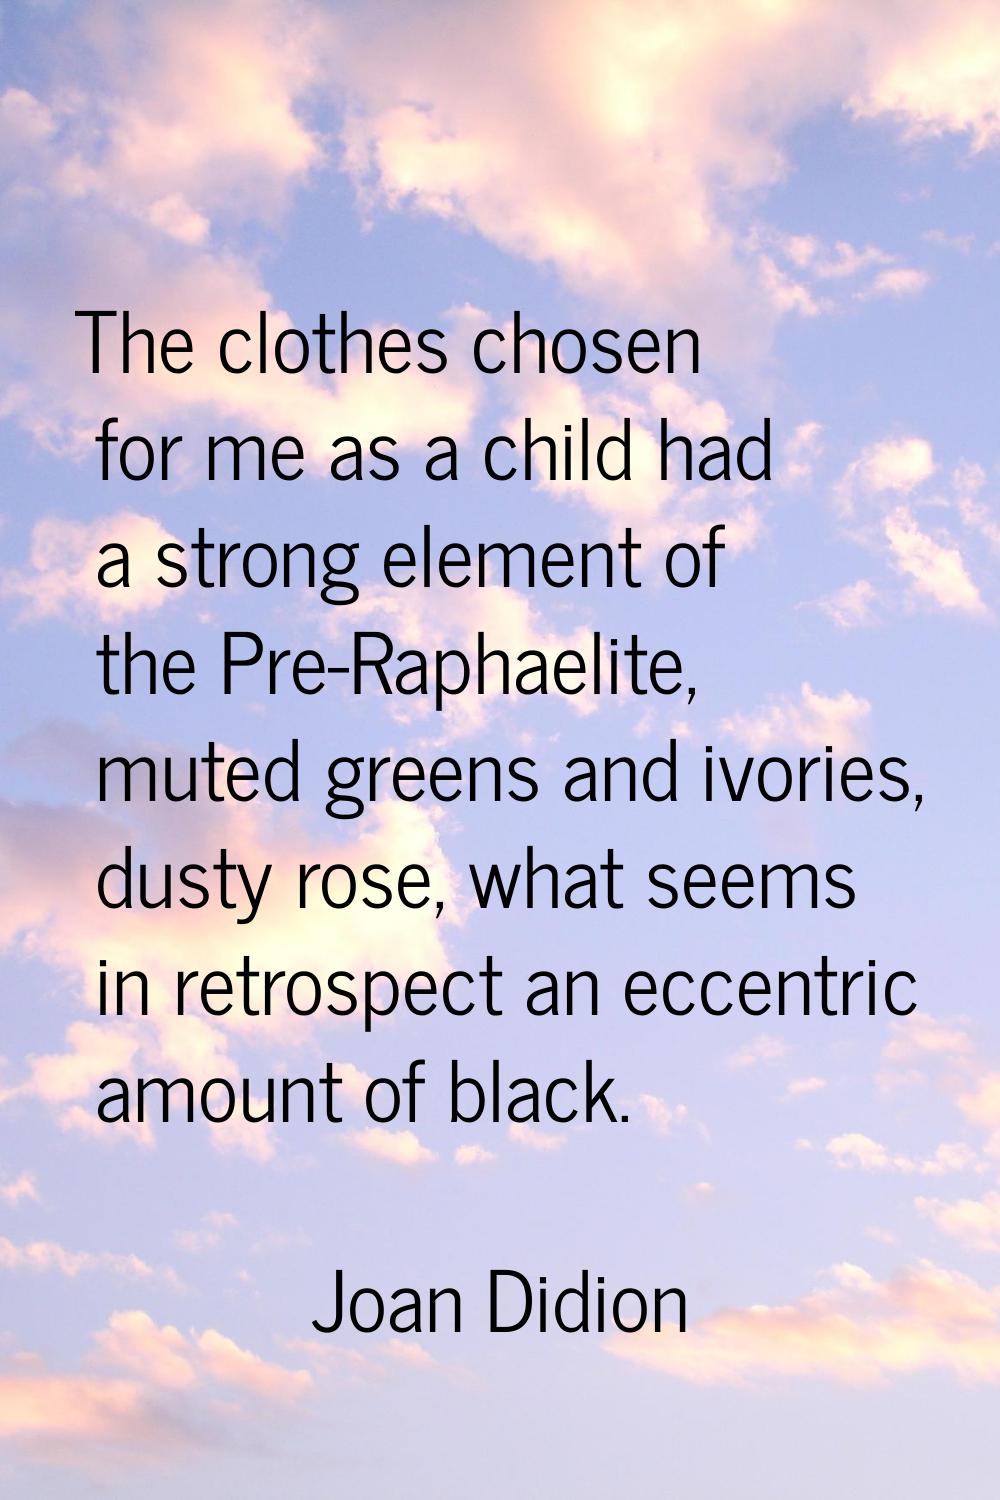 The clothes chosen for me as a child had a strong element of the Pre-Raphaelite, muted greens and i